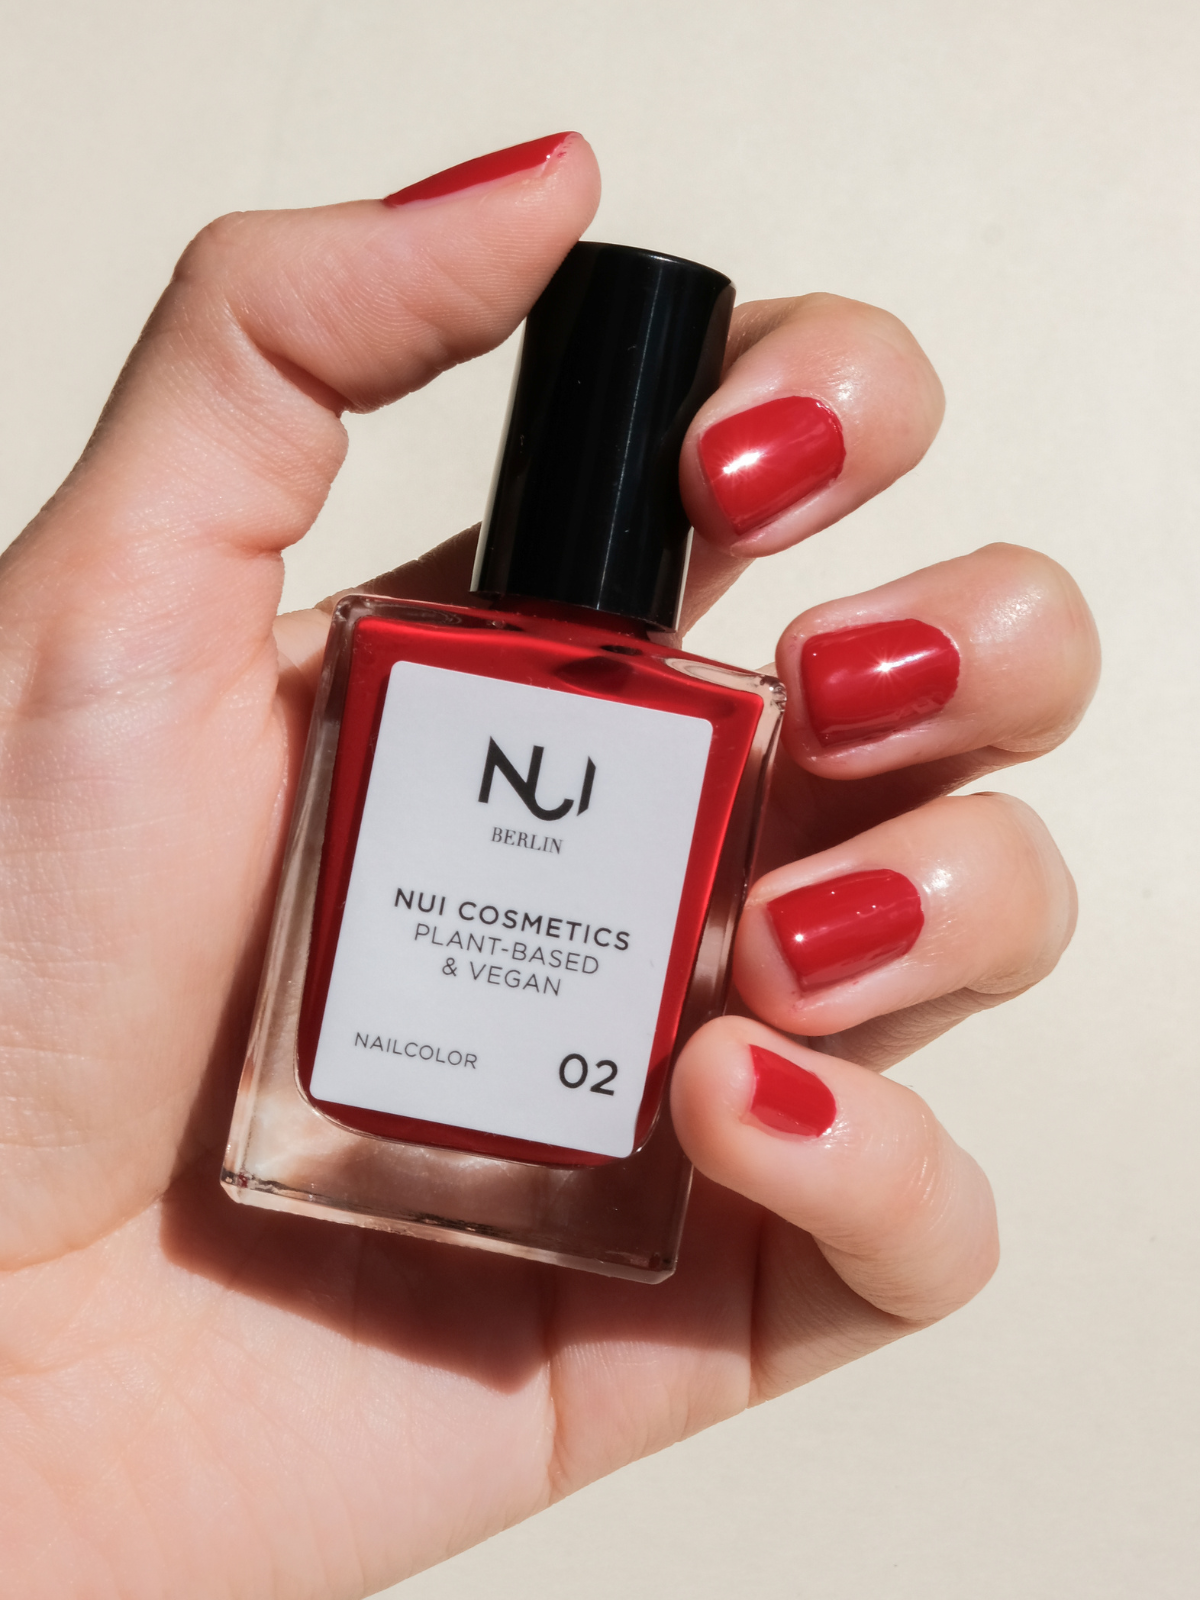 RED - NUI Plant-based & 02 – Nailcolor Vegan Cosmetics